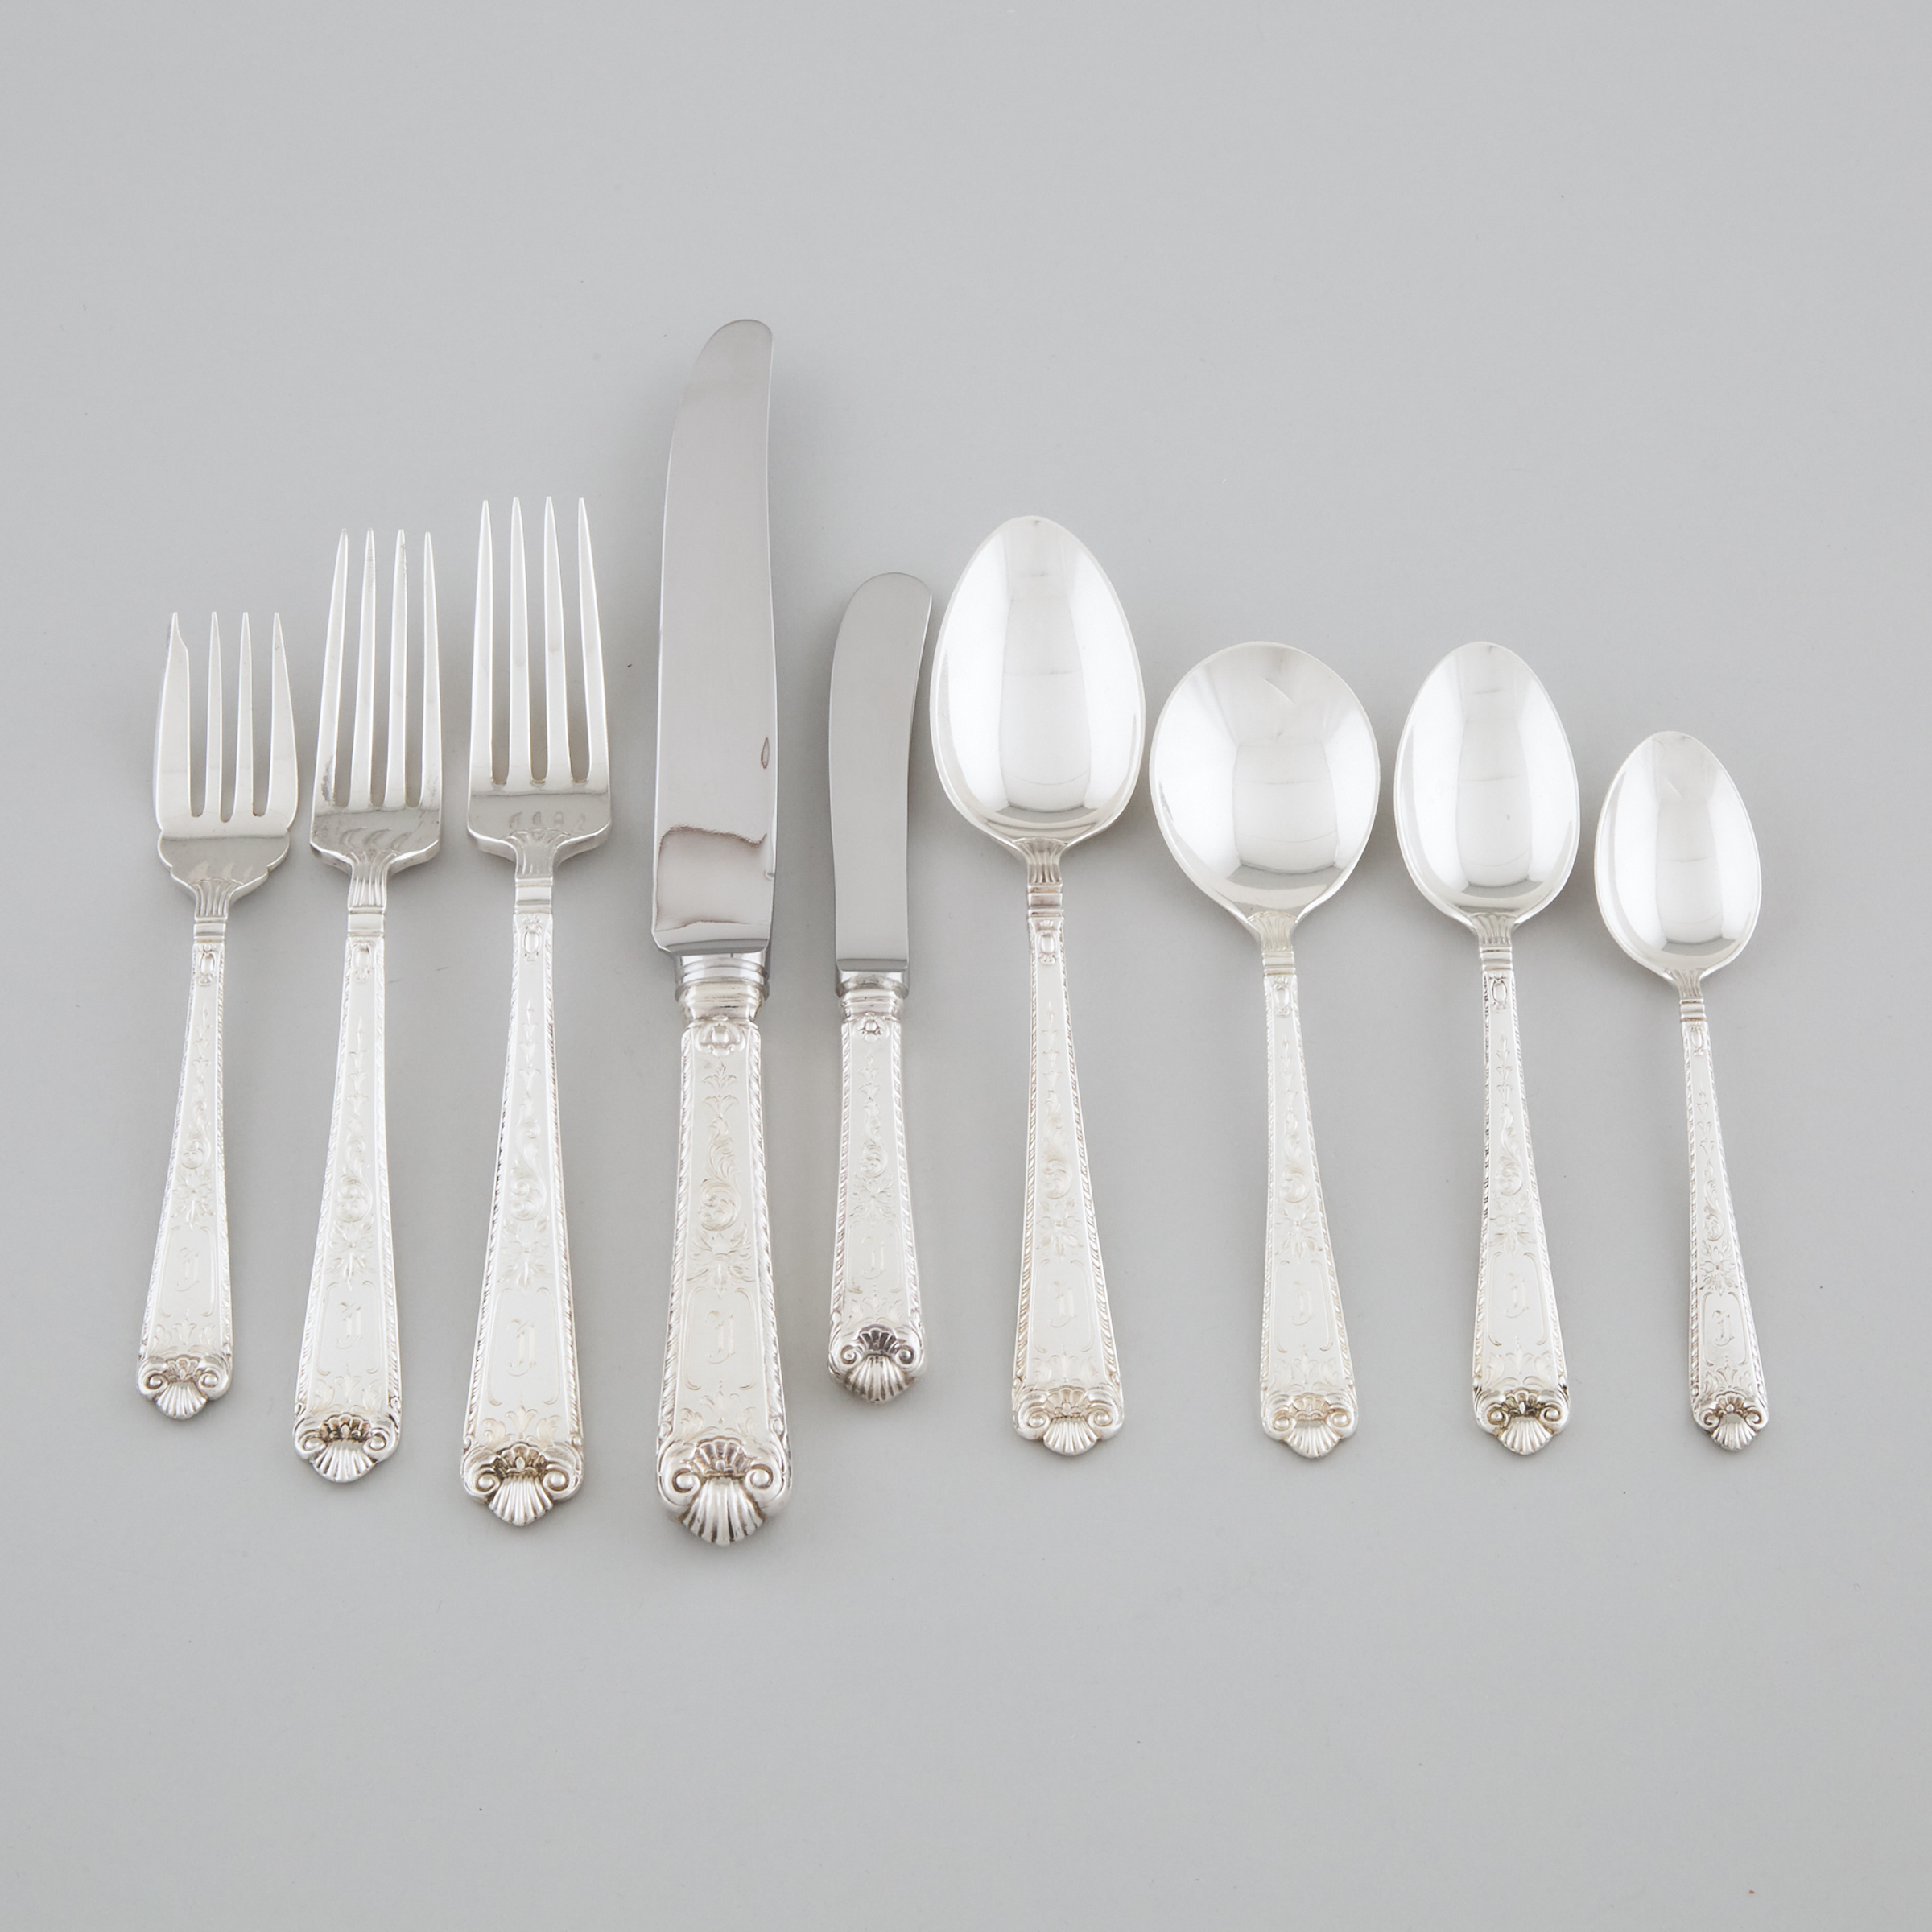 Canadian Silver 'George II Engraved' Pattern Flatware Service, Henry Birks & Sons, Montreal Que., 20th century